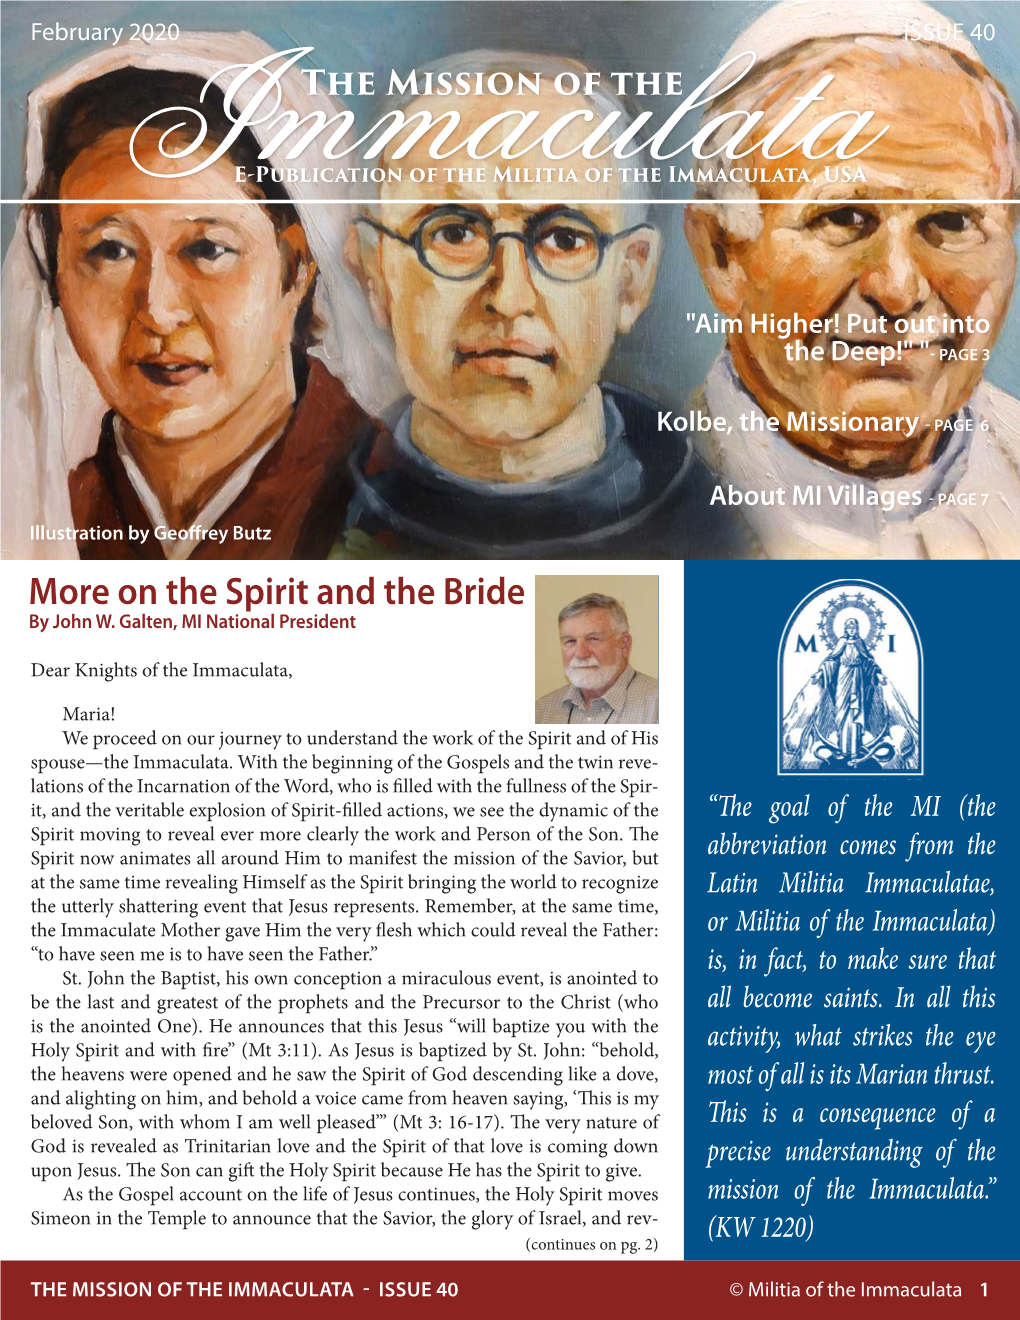 More on the Spirit and the Bride by John W